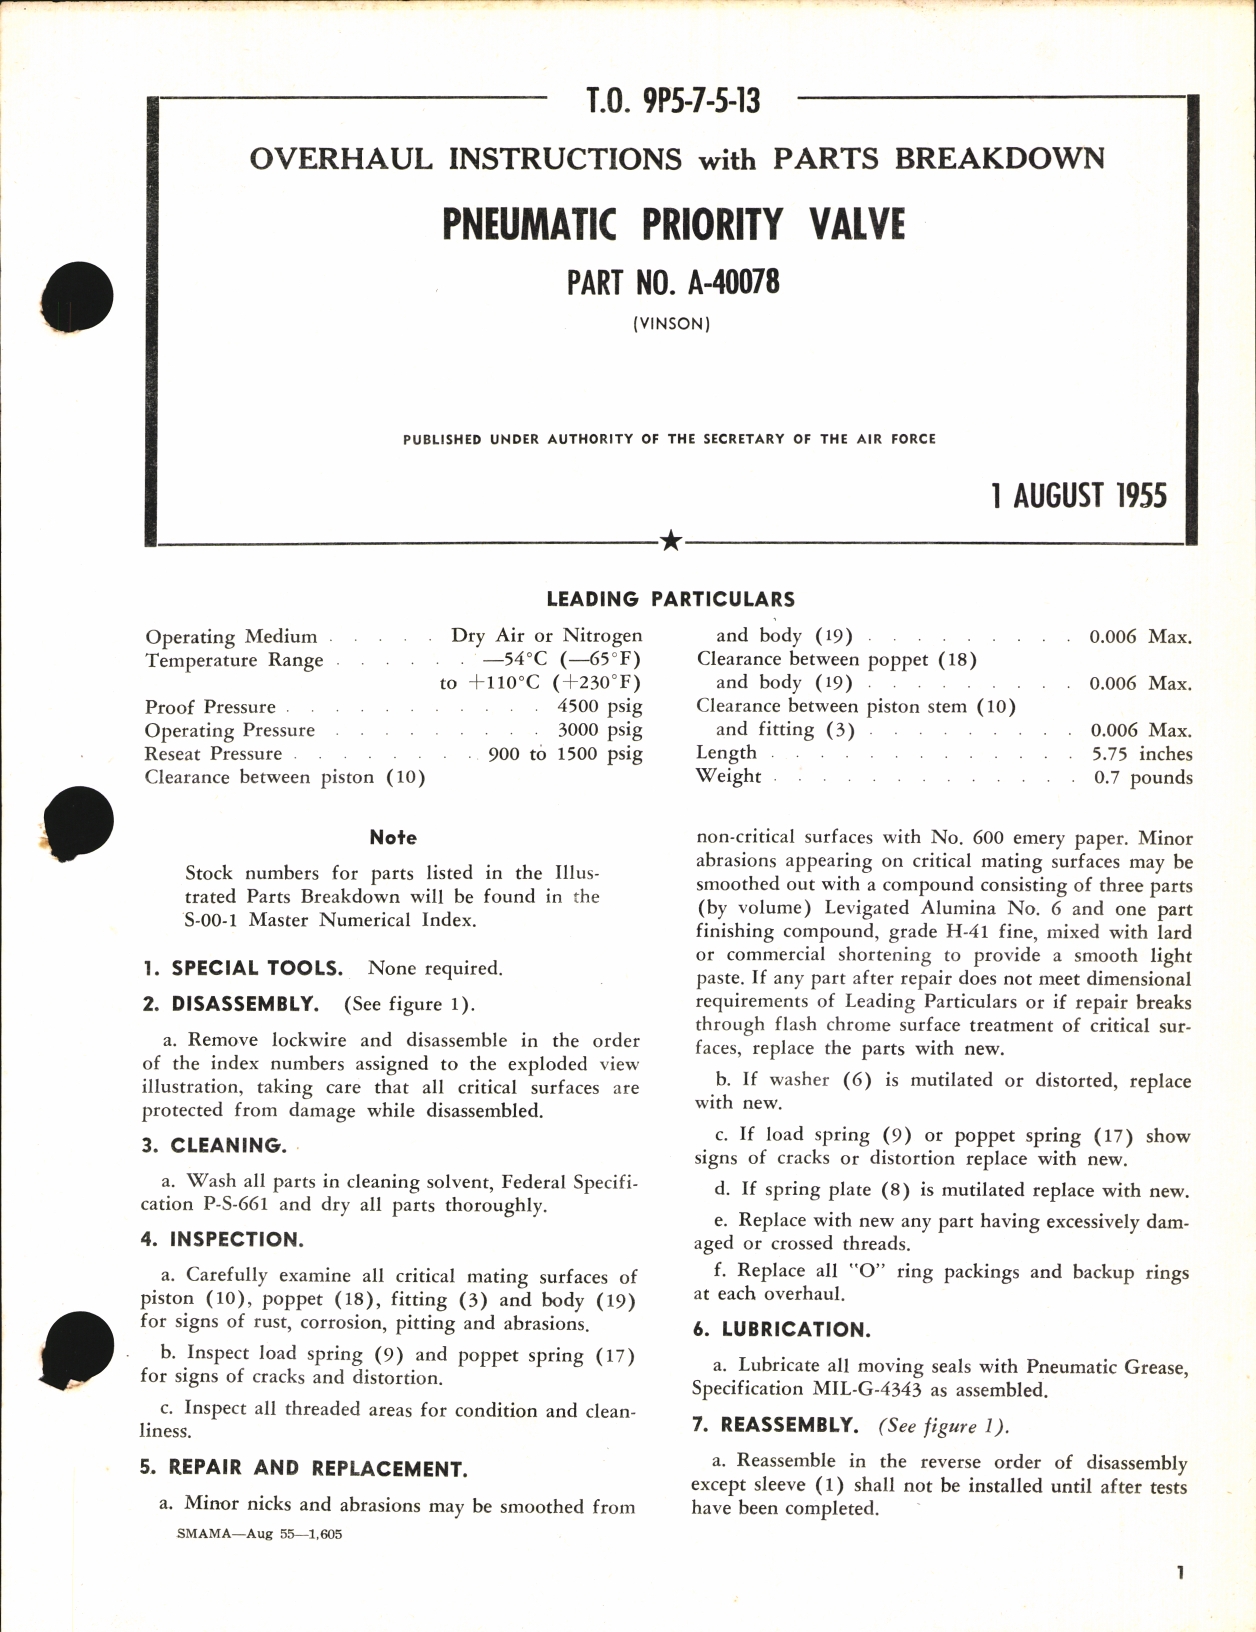 Sample page 1 from AirCorps Library document: Overhaul Instructions with Parts Breakdown for Pneumatic Priority Valve Part No. A-40078